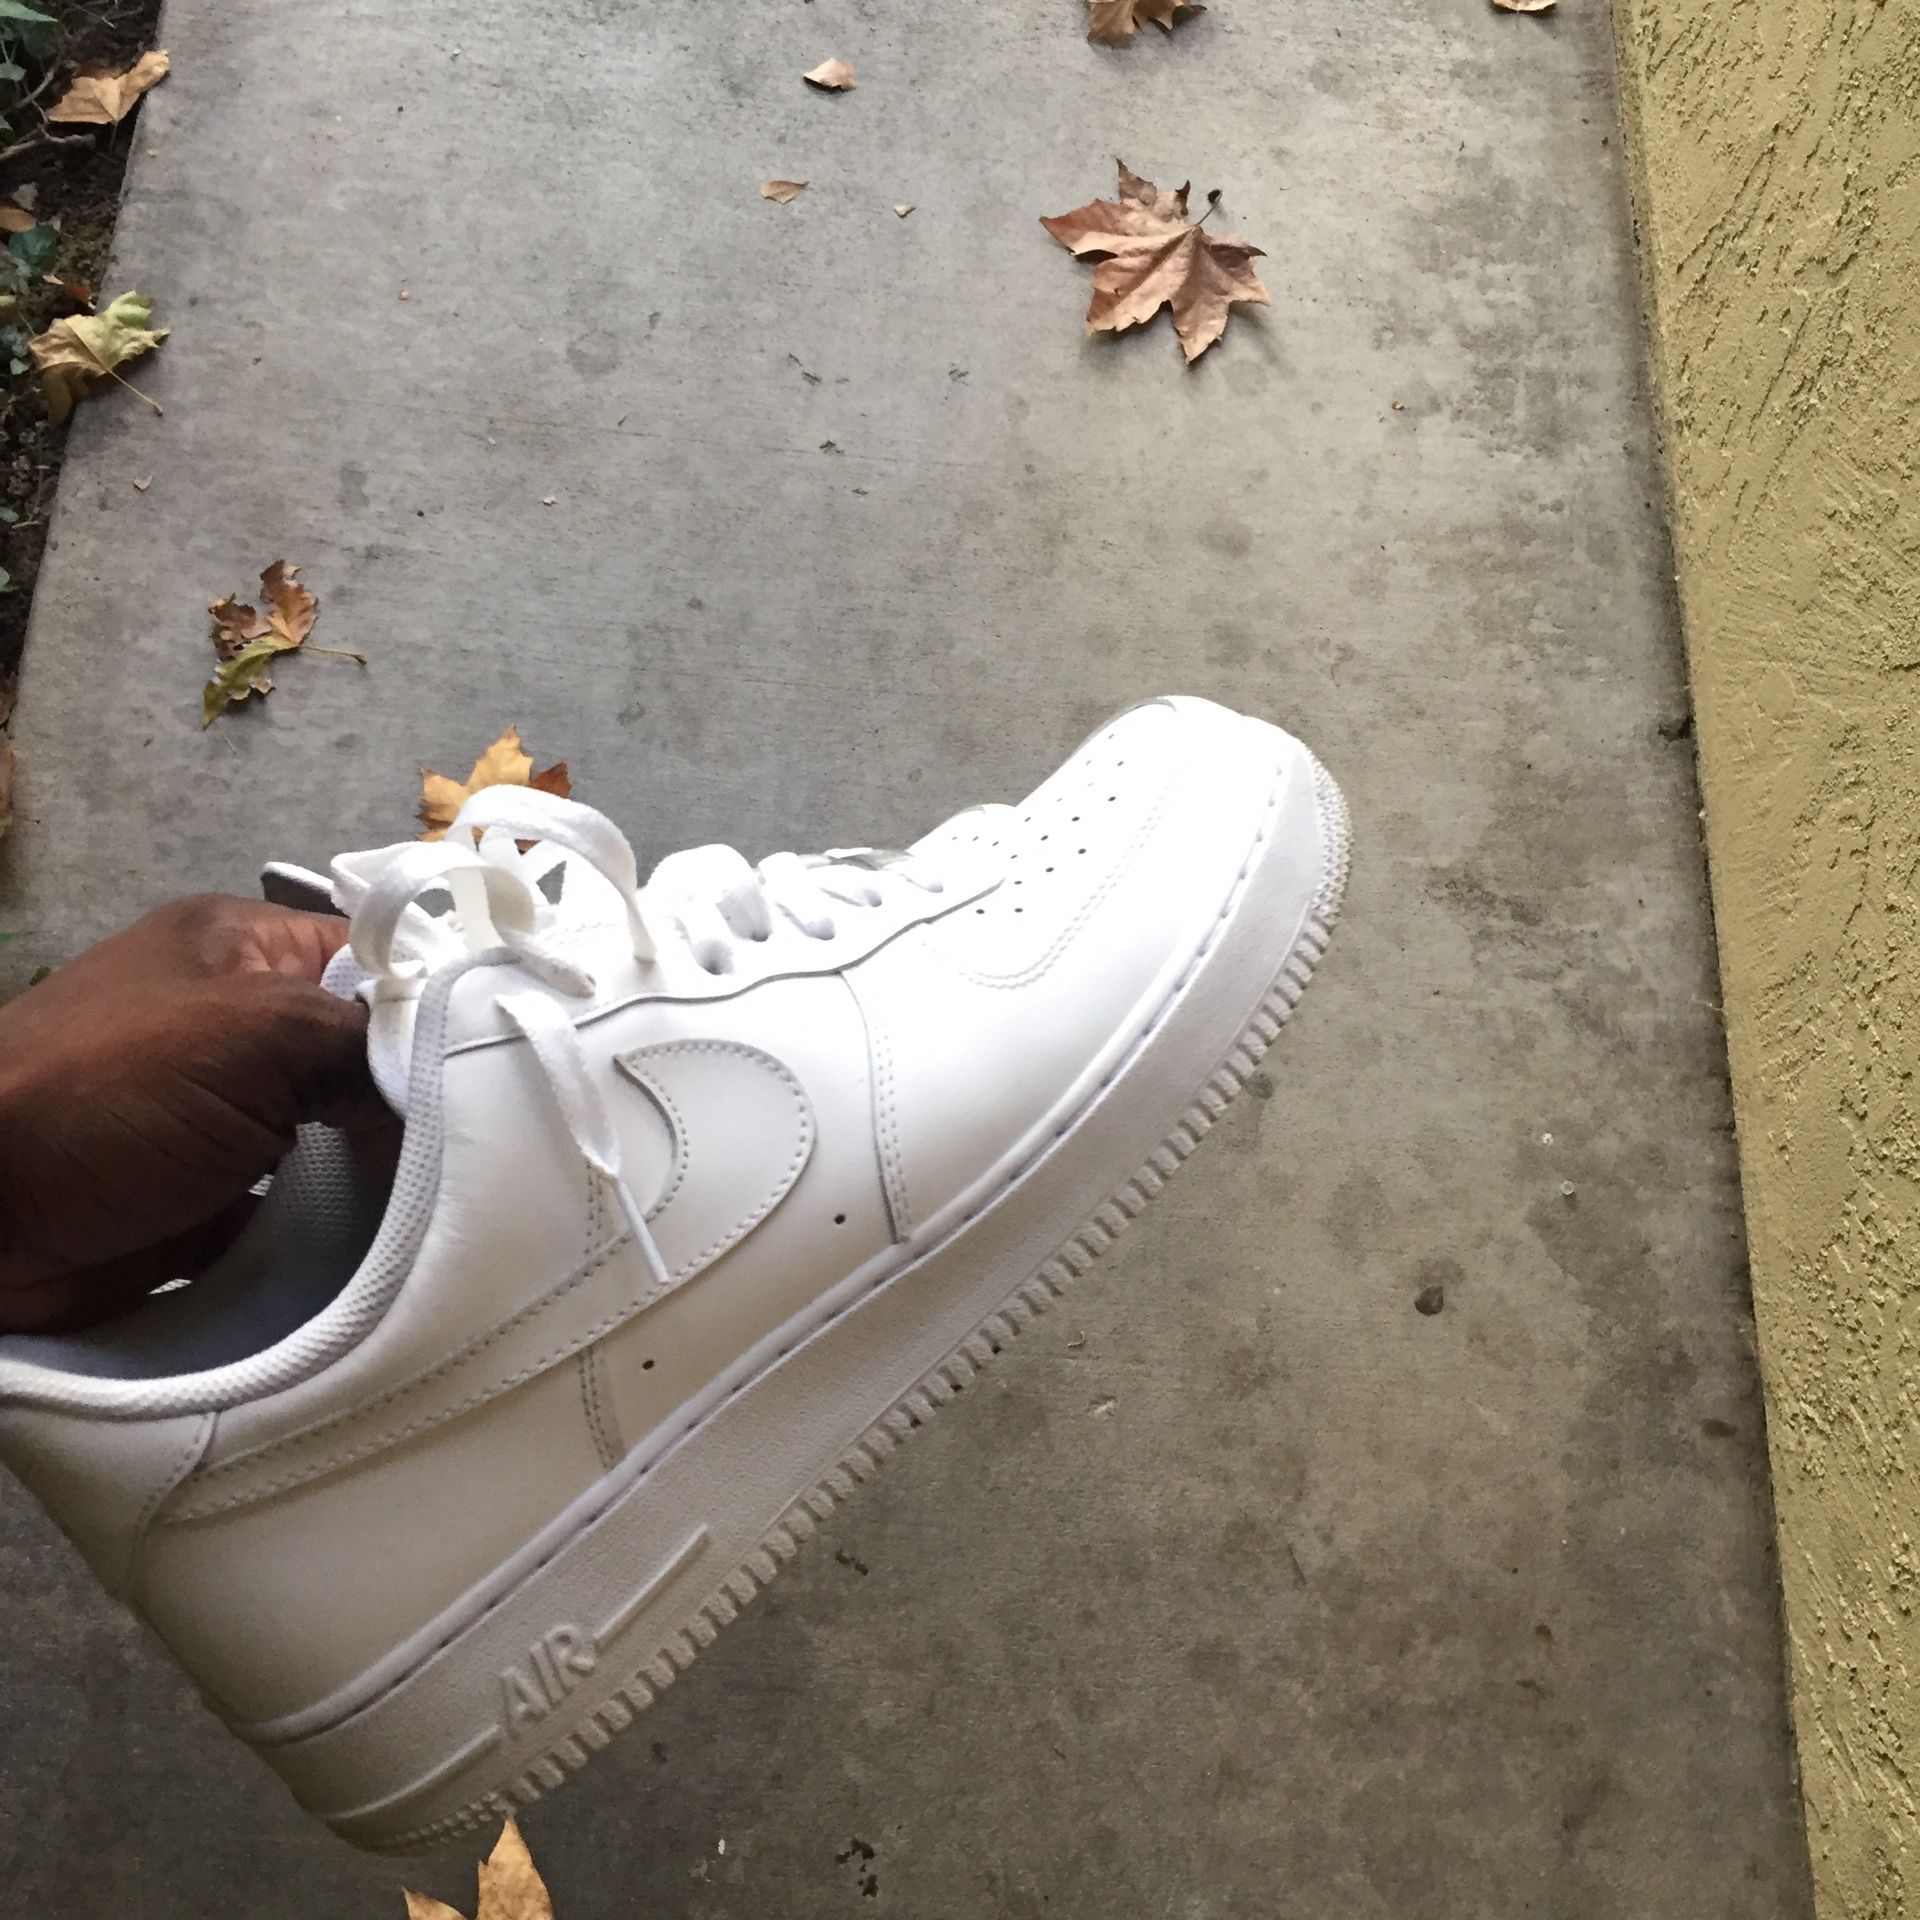 Air Force 1 size 10 asking $45